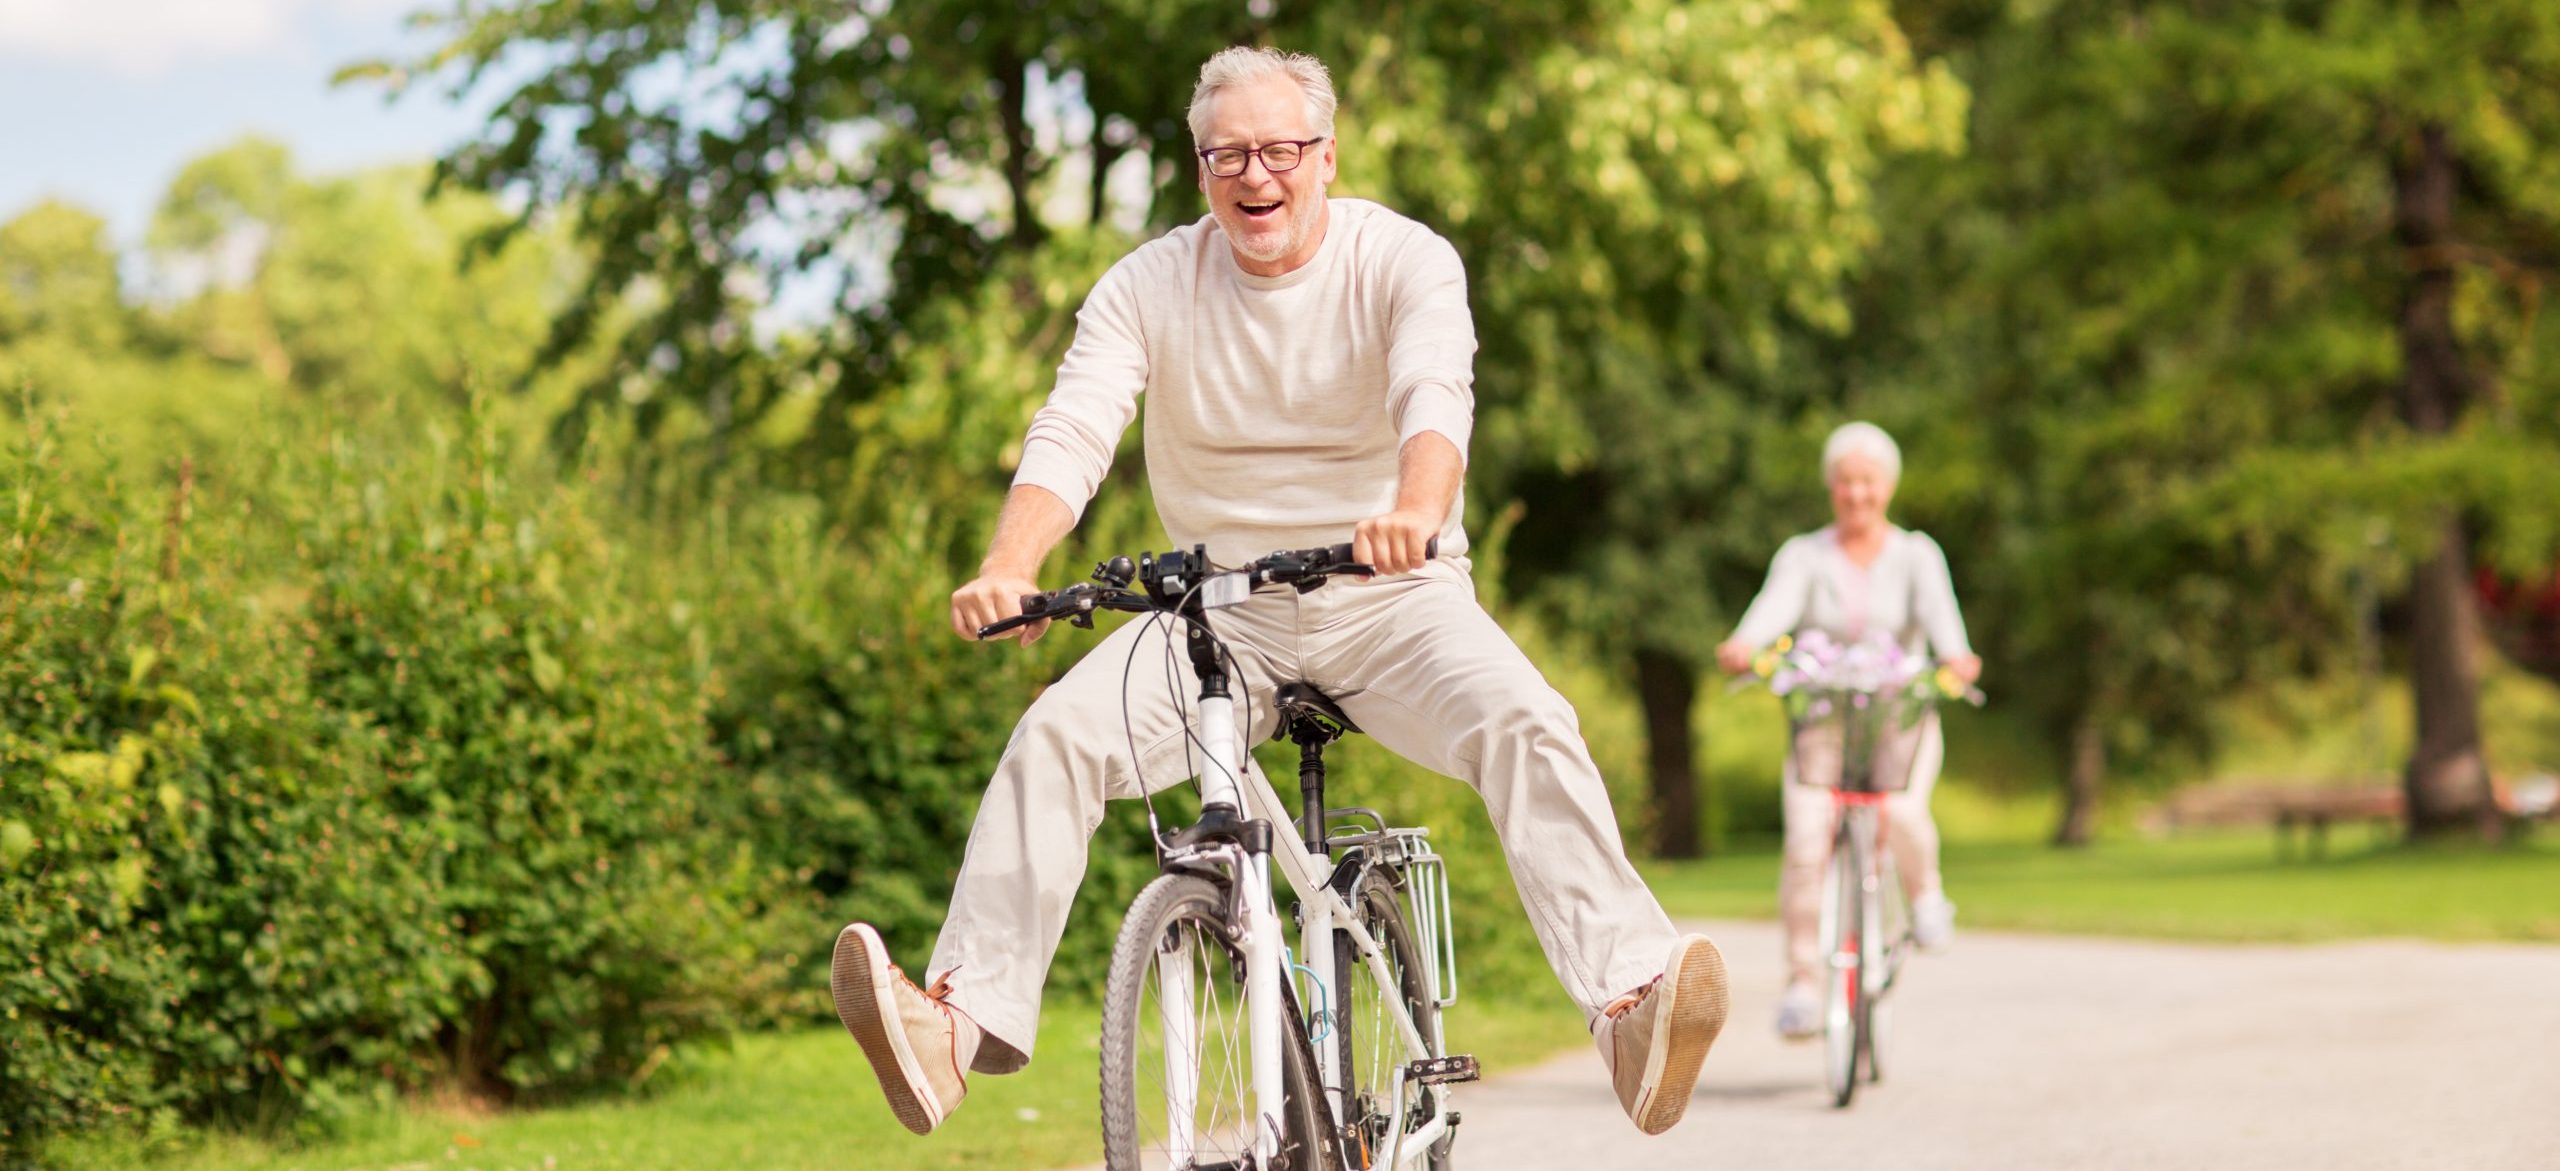 A man on a bike is pleased with his smile thanks to the benefits of single tooth dental implants